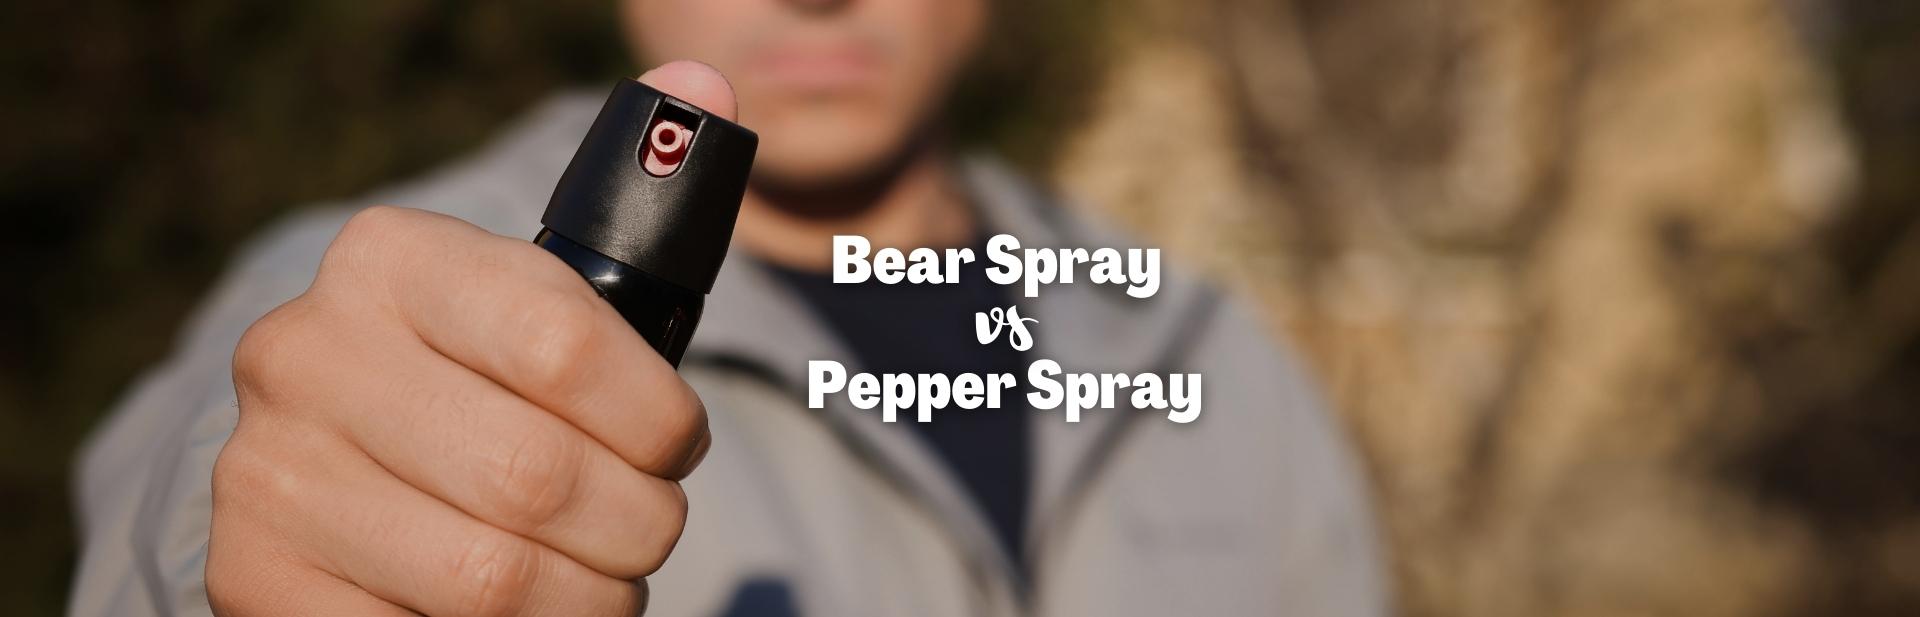 Bear Spray vs Pepper Spray: What Should You Bring On Your Camping Trip?